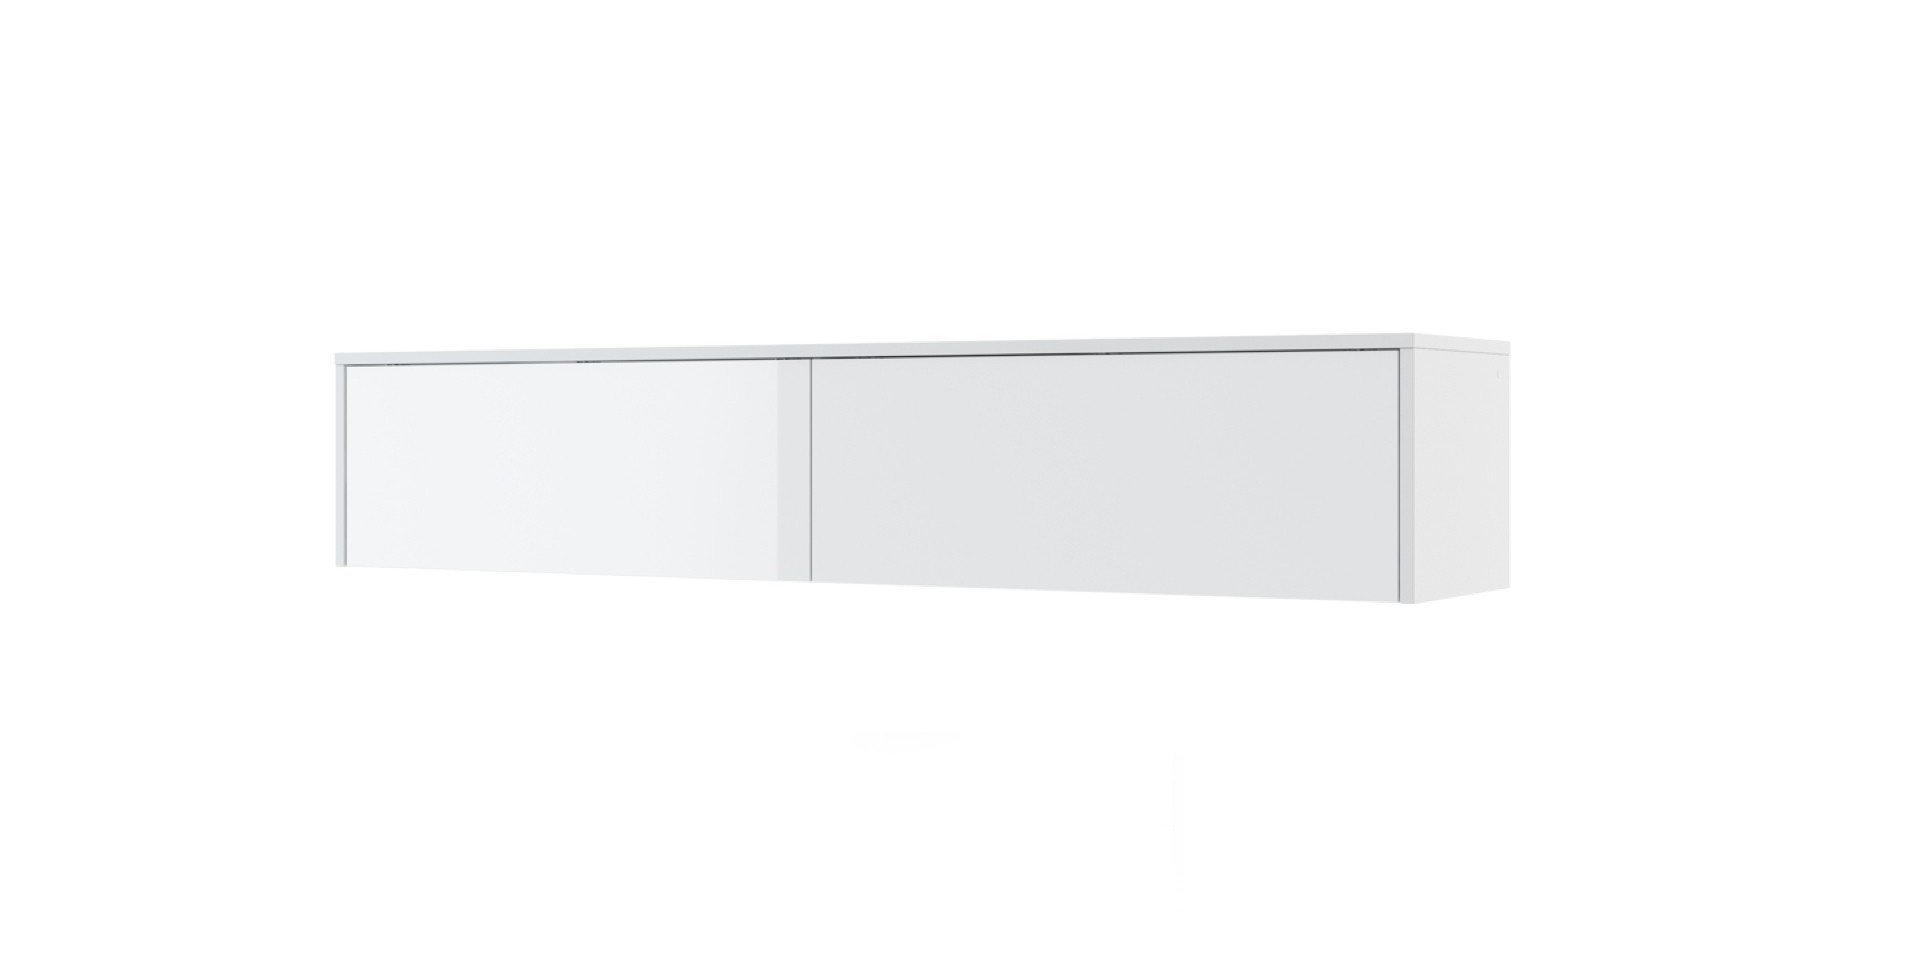 View BC15 Over Bed Unit for Horizontal Wall Bed Concept 160cm White Gloss 211cm information